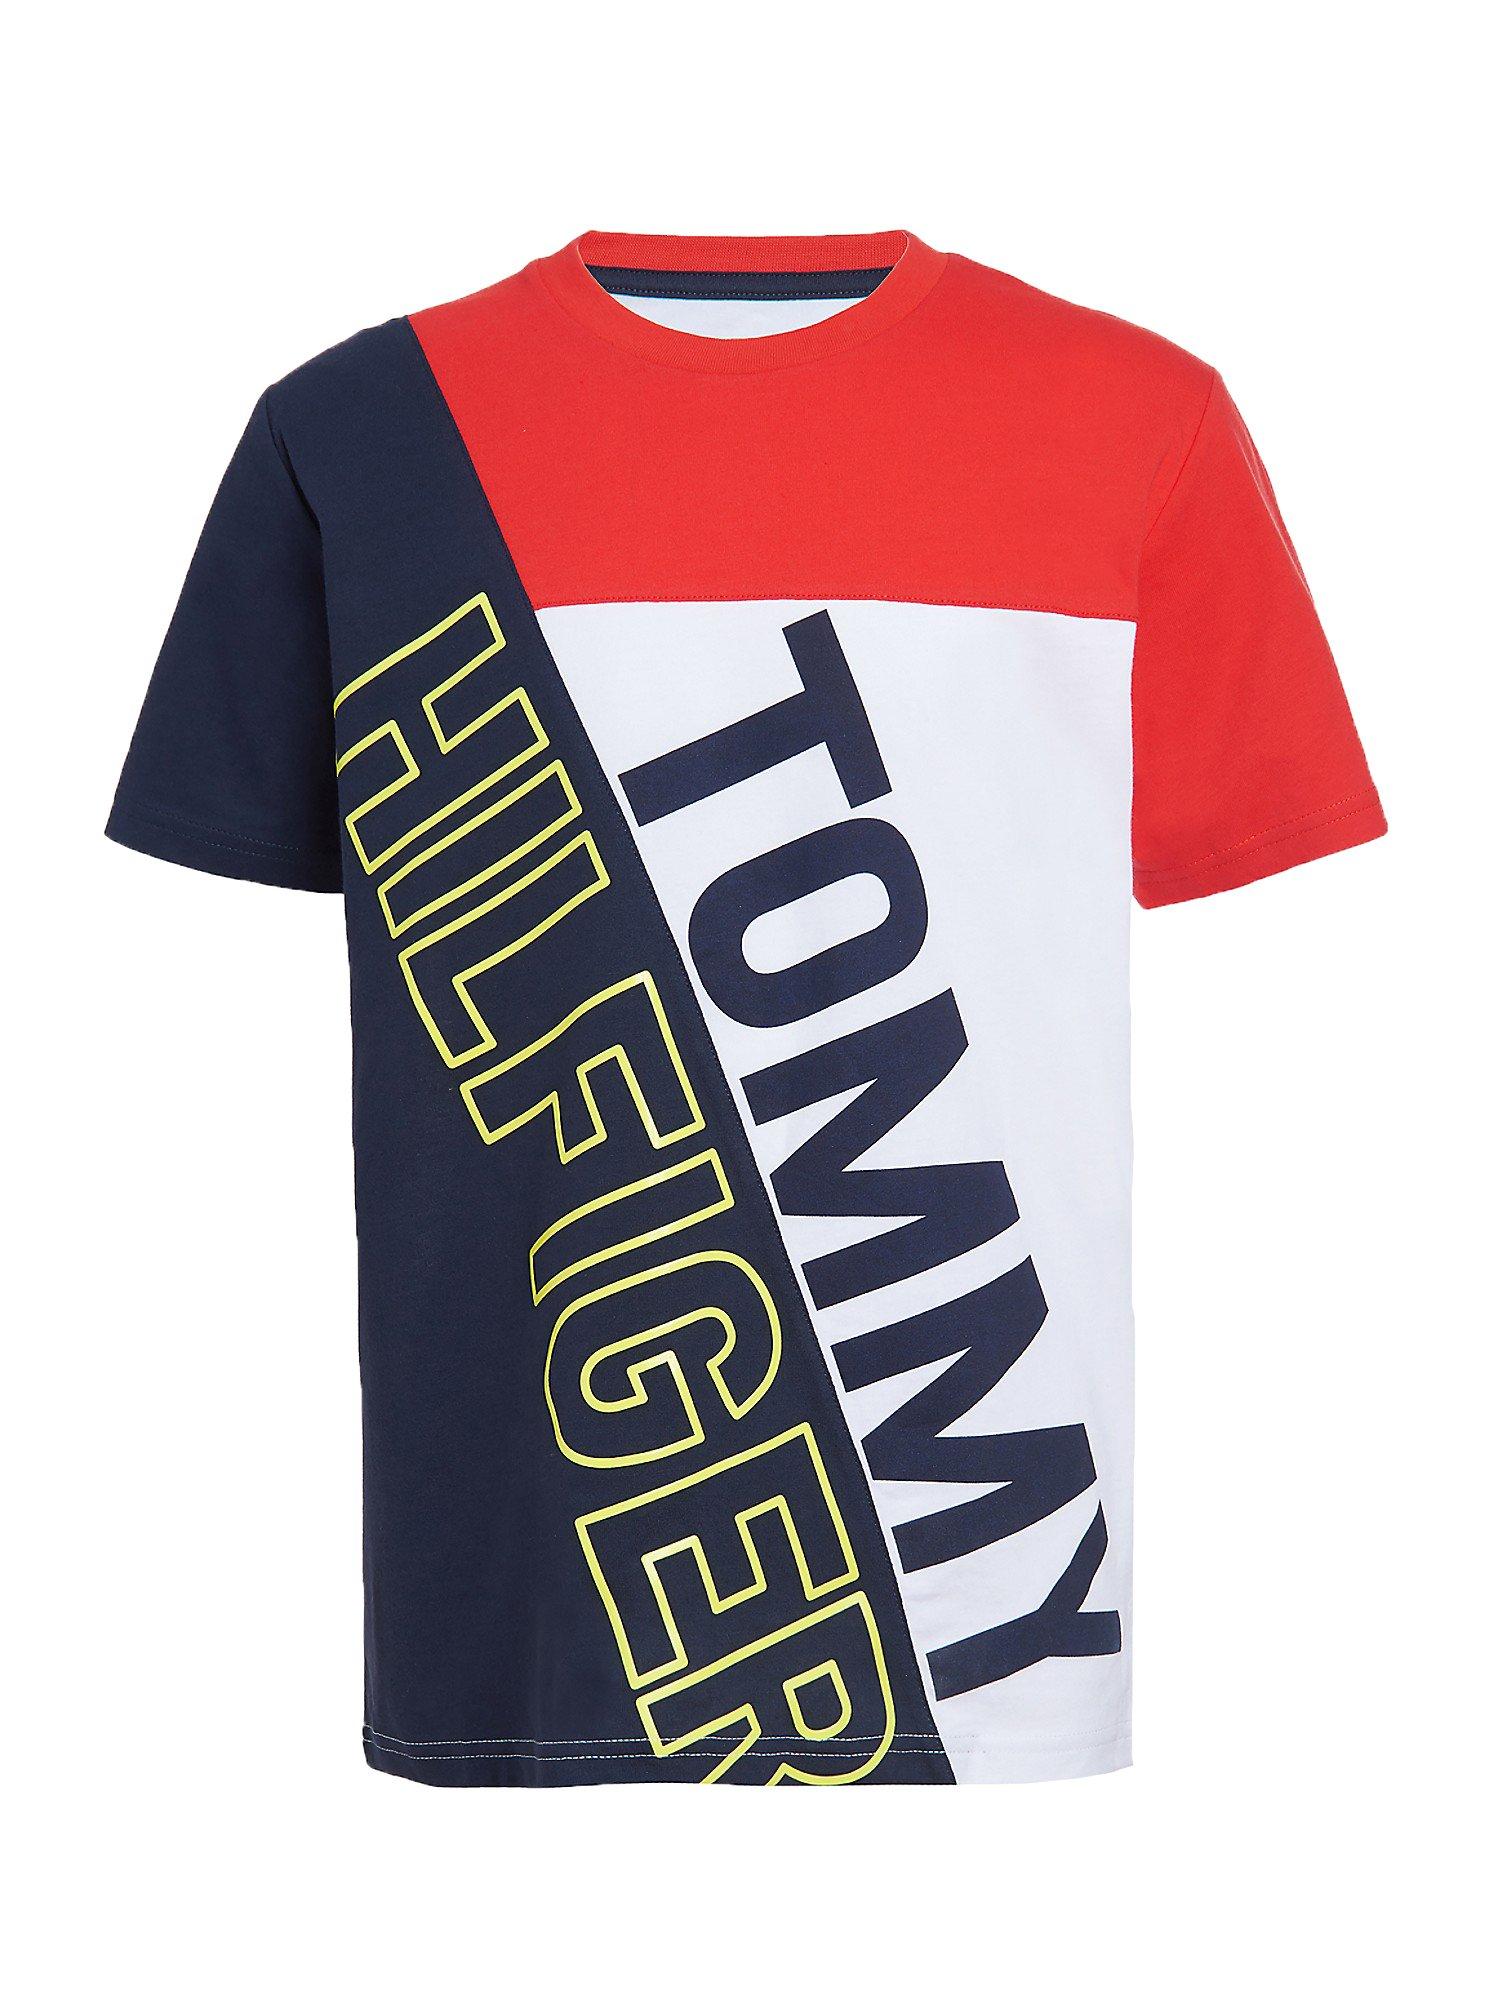 tommy hilfiger clothes for toddlers